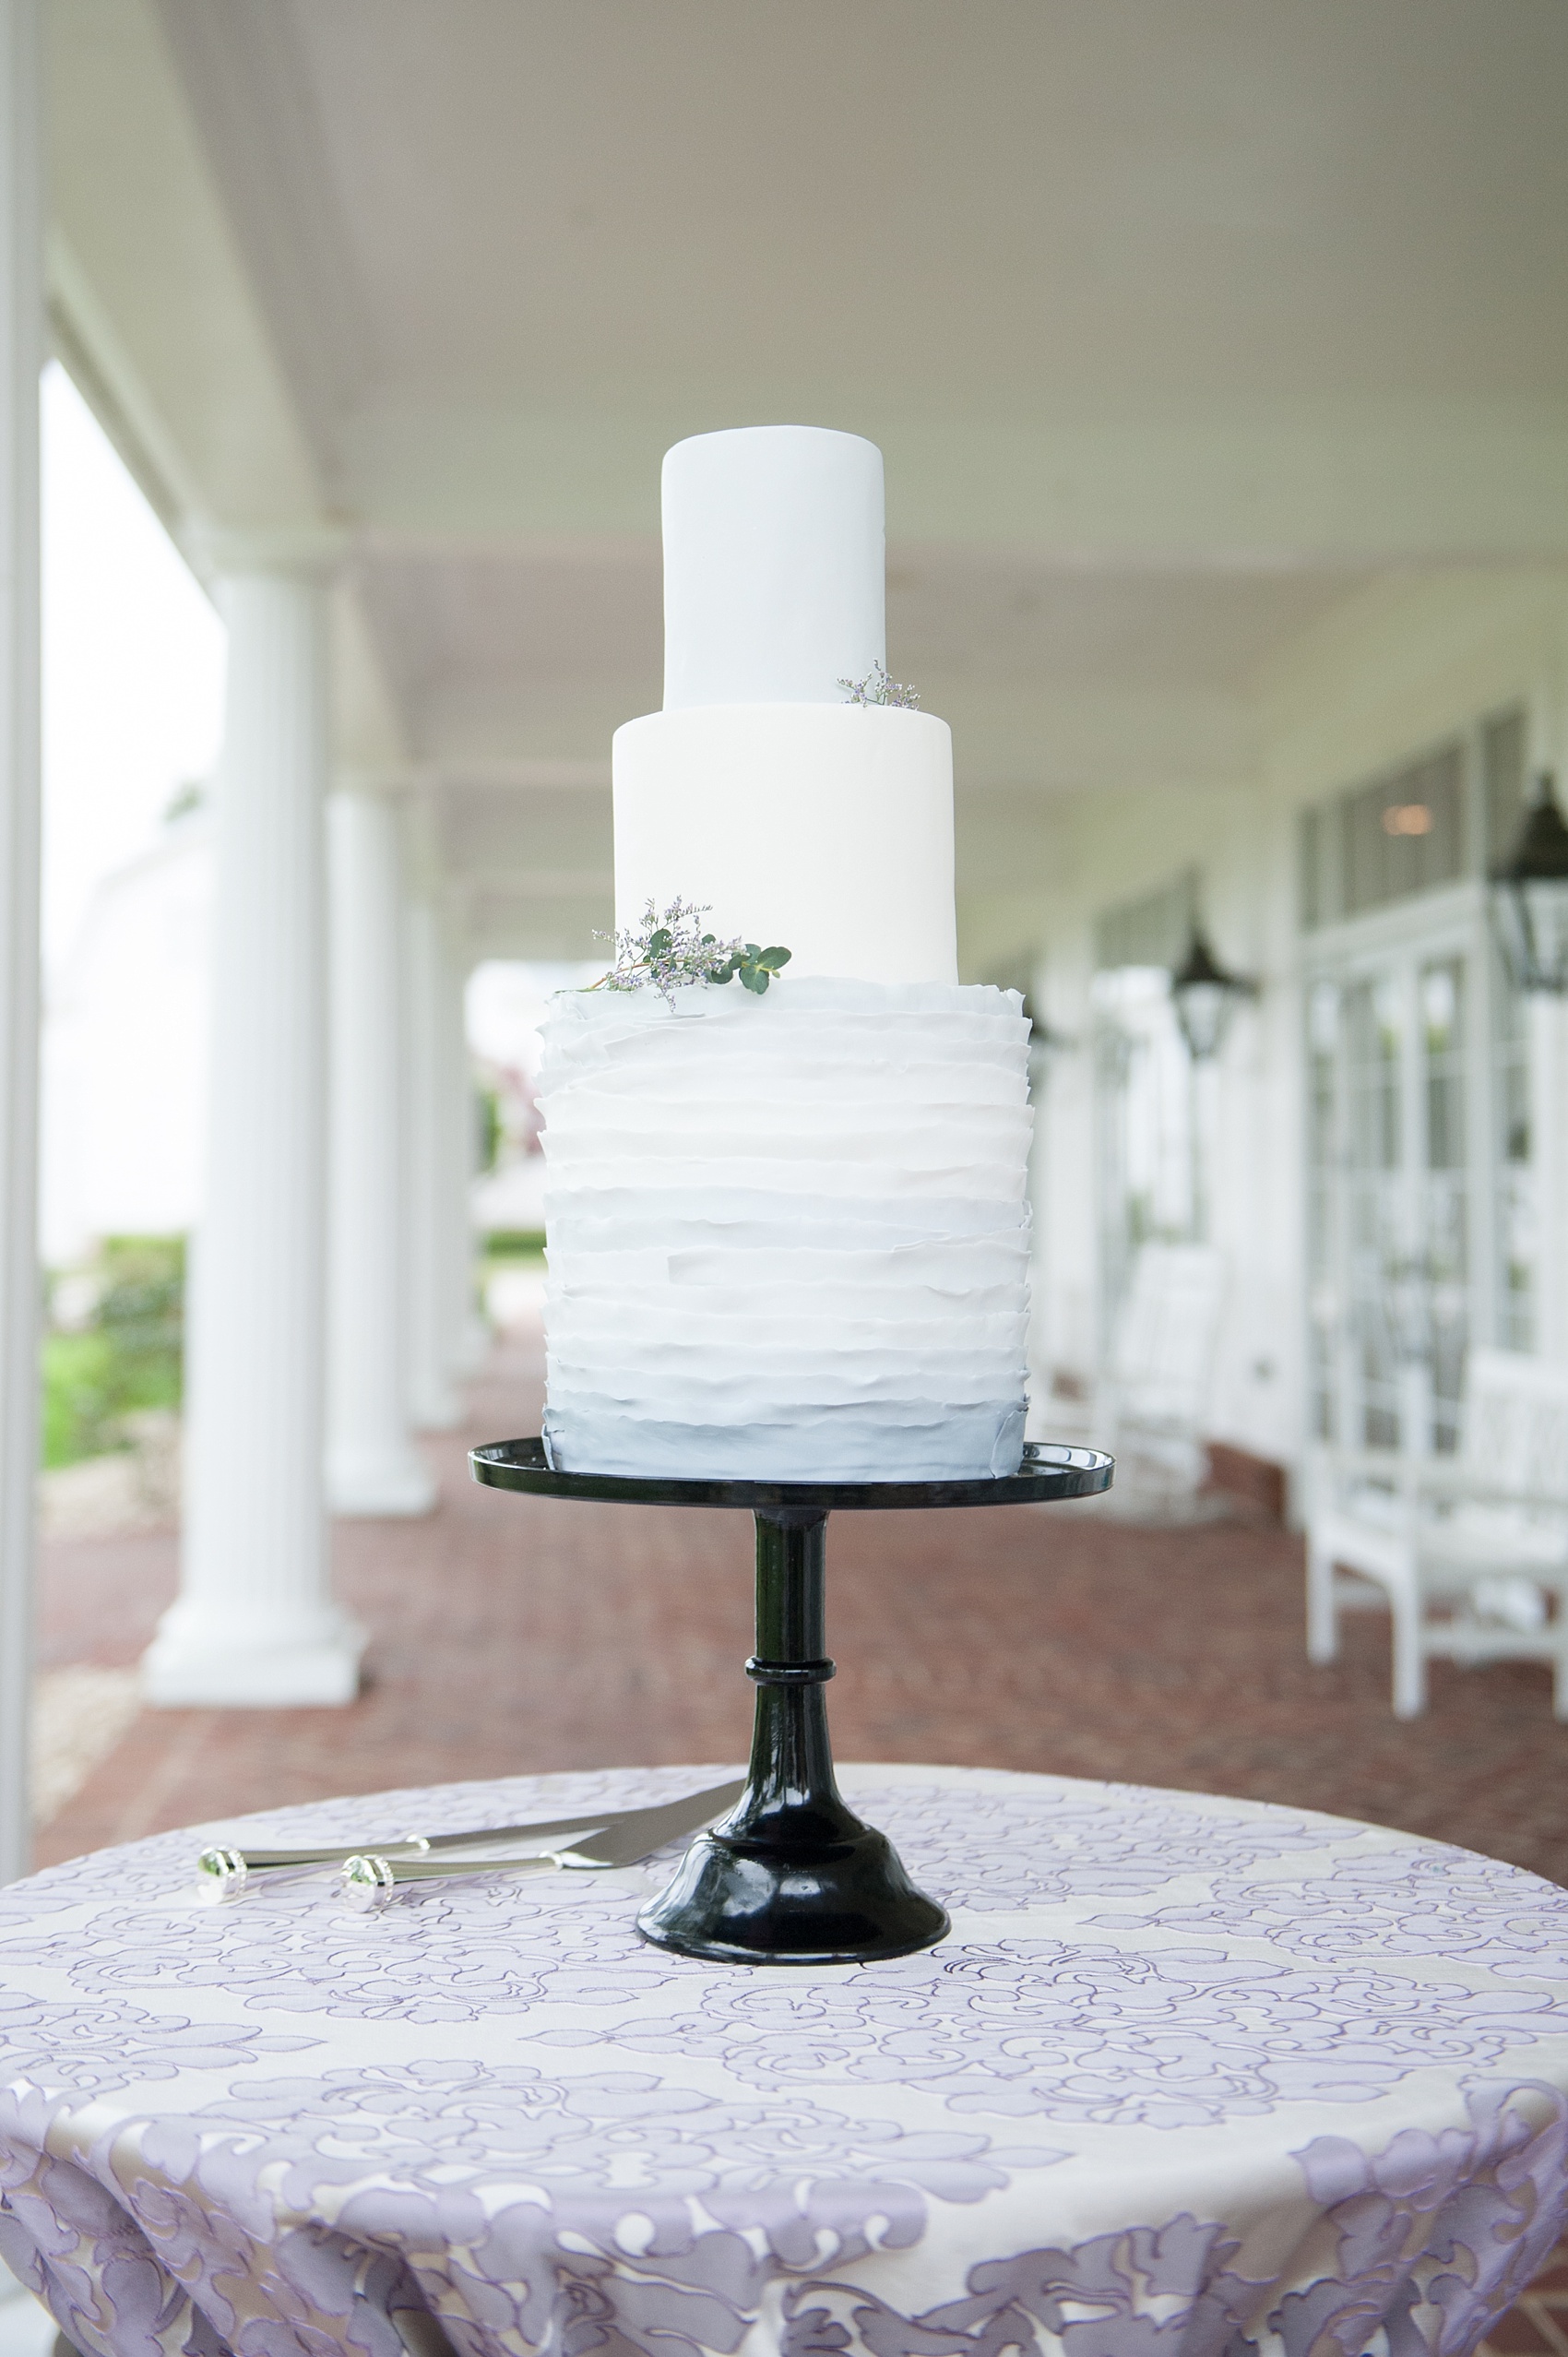 Mikkel Paige Photography images of a Rose Hill Plantation wedding inspiration. Photos of the tiered wedding cake with light purple ruffles of fondant by The Cupcake Shoppe.